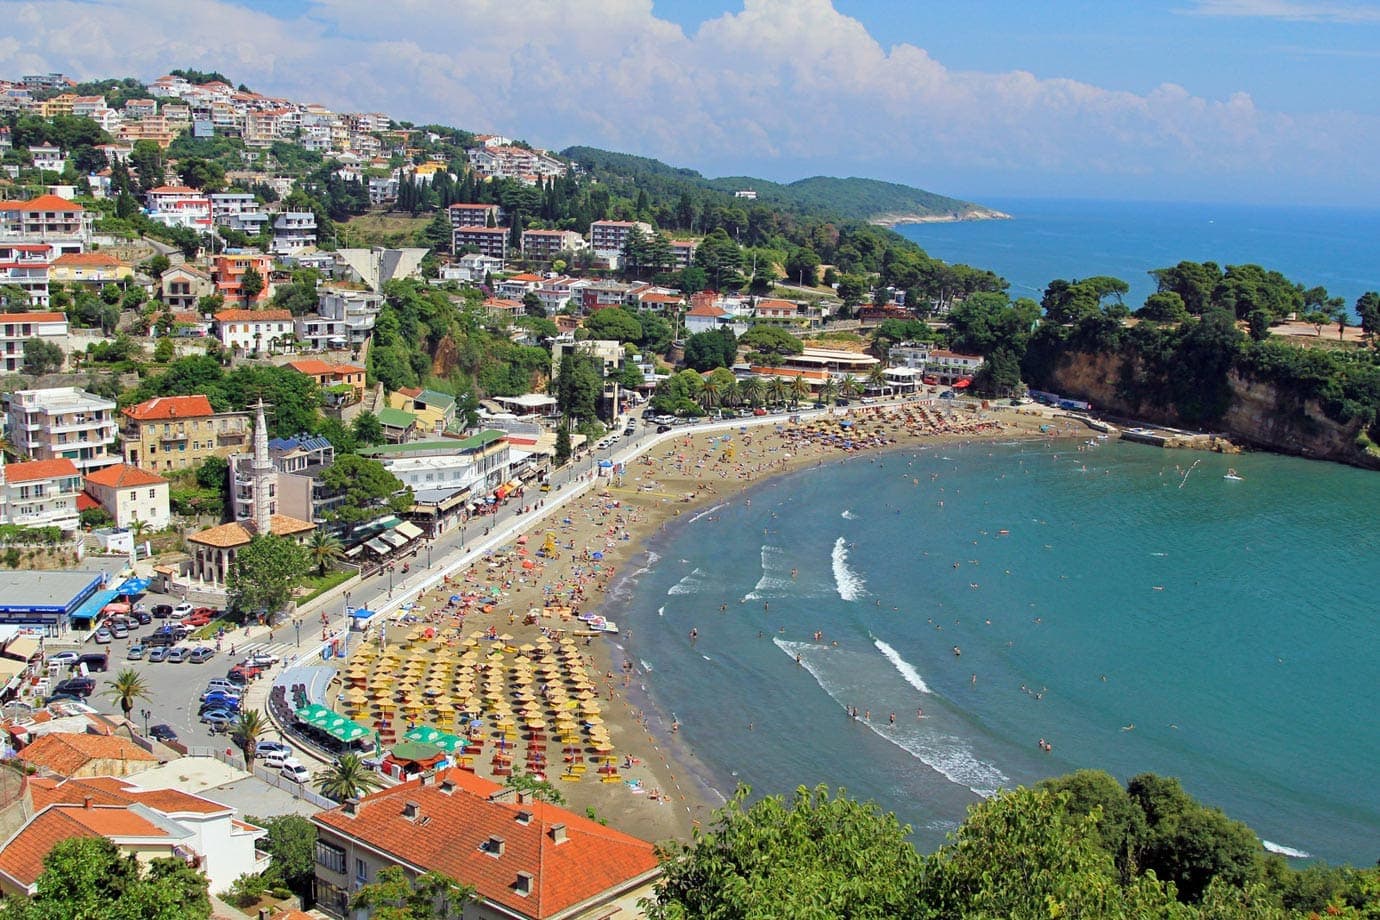 Ulcinj; Neither One Town nor the Other